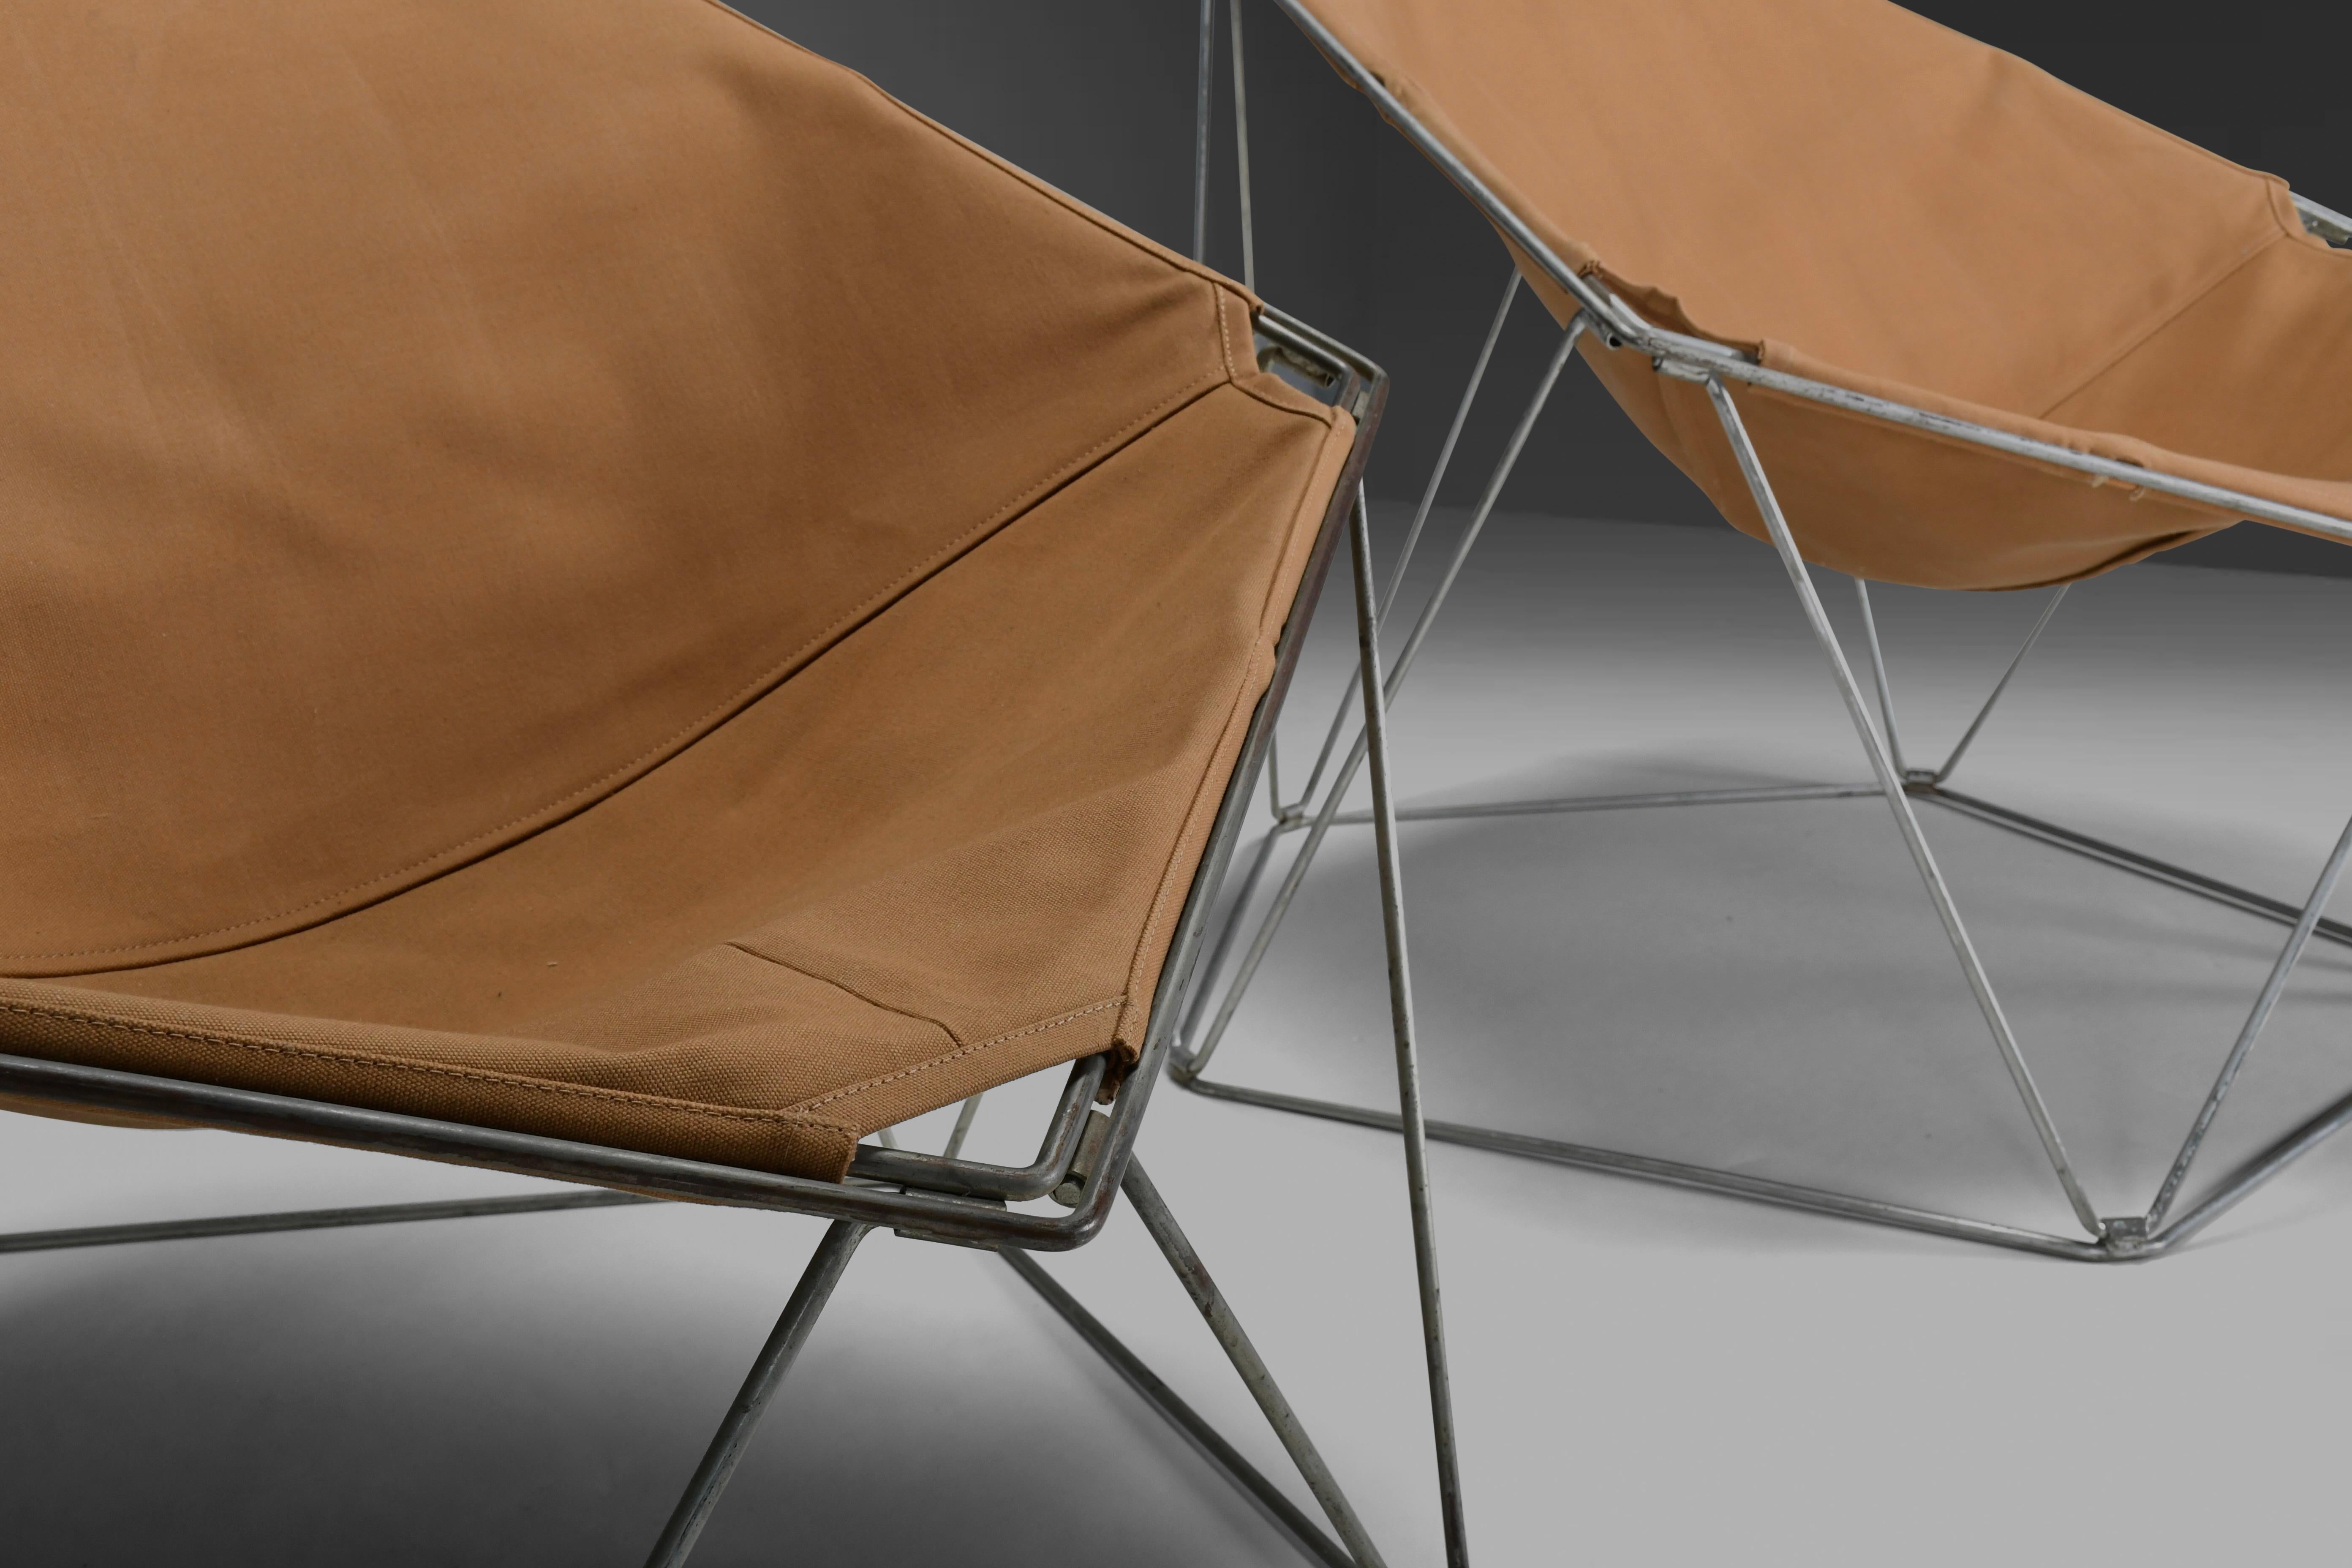 Metal Early Ocher Canvas Penta Chairs by Jean-Paul Barray & Kim Moltzer for Bofinger For Sale